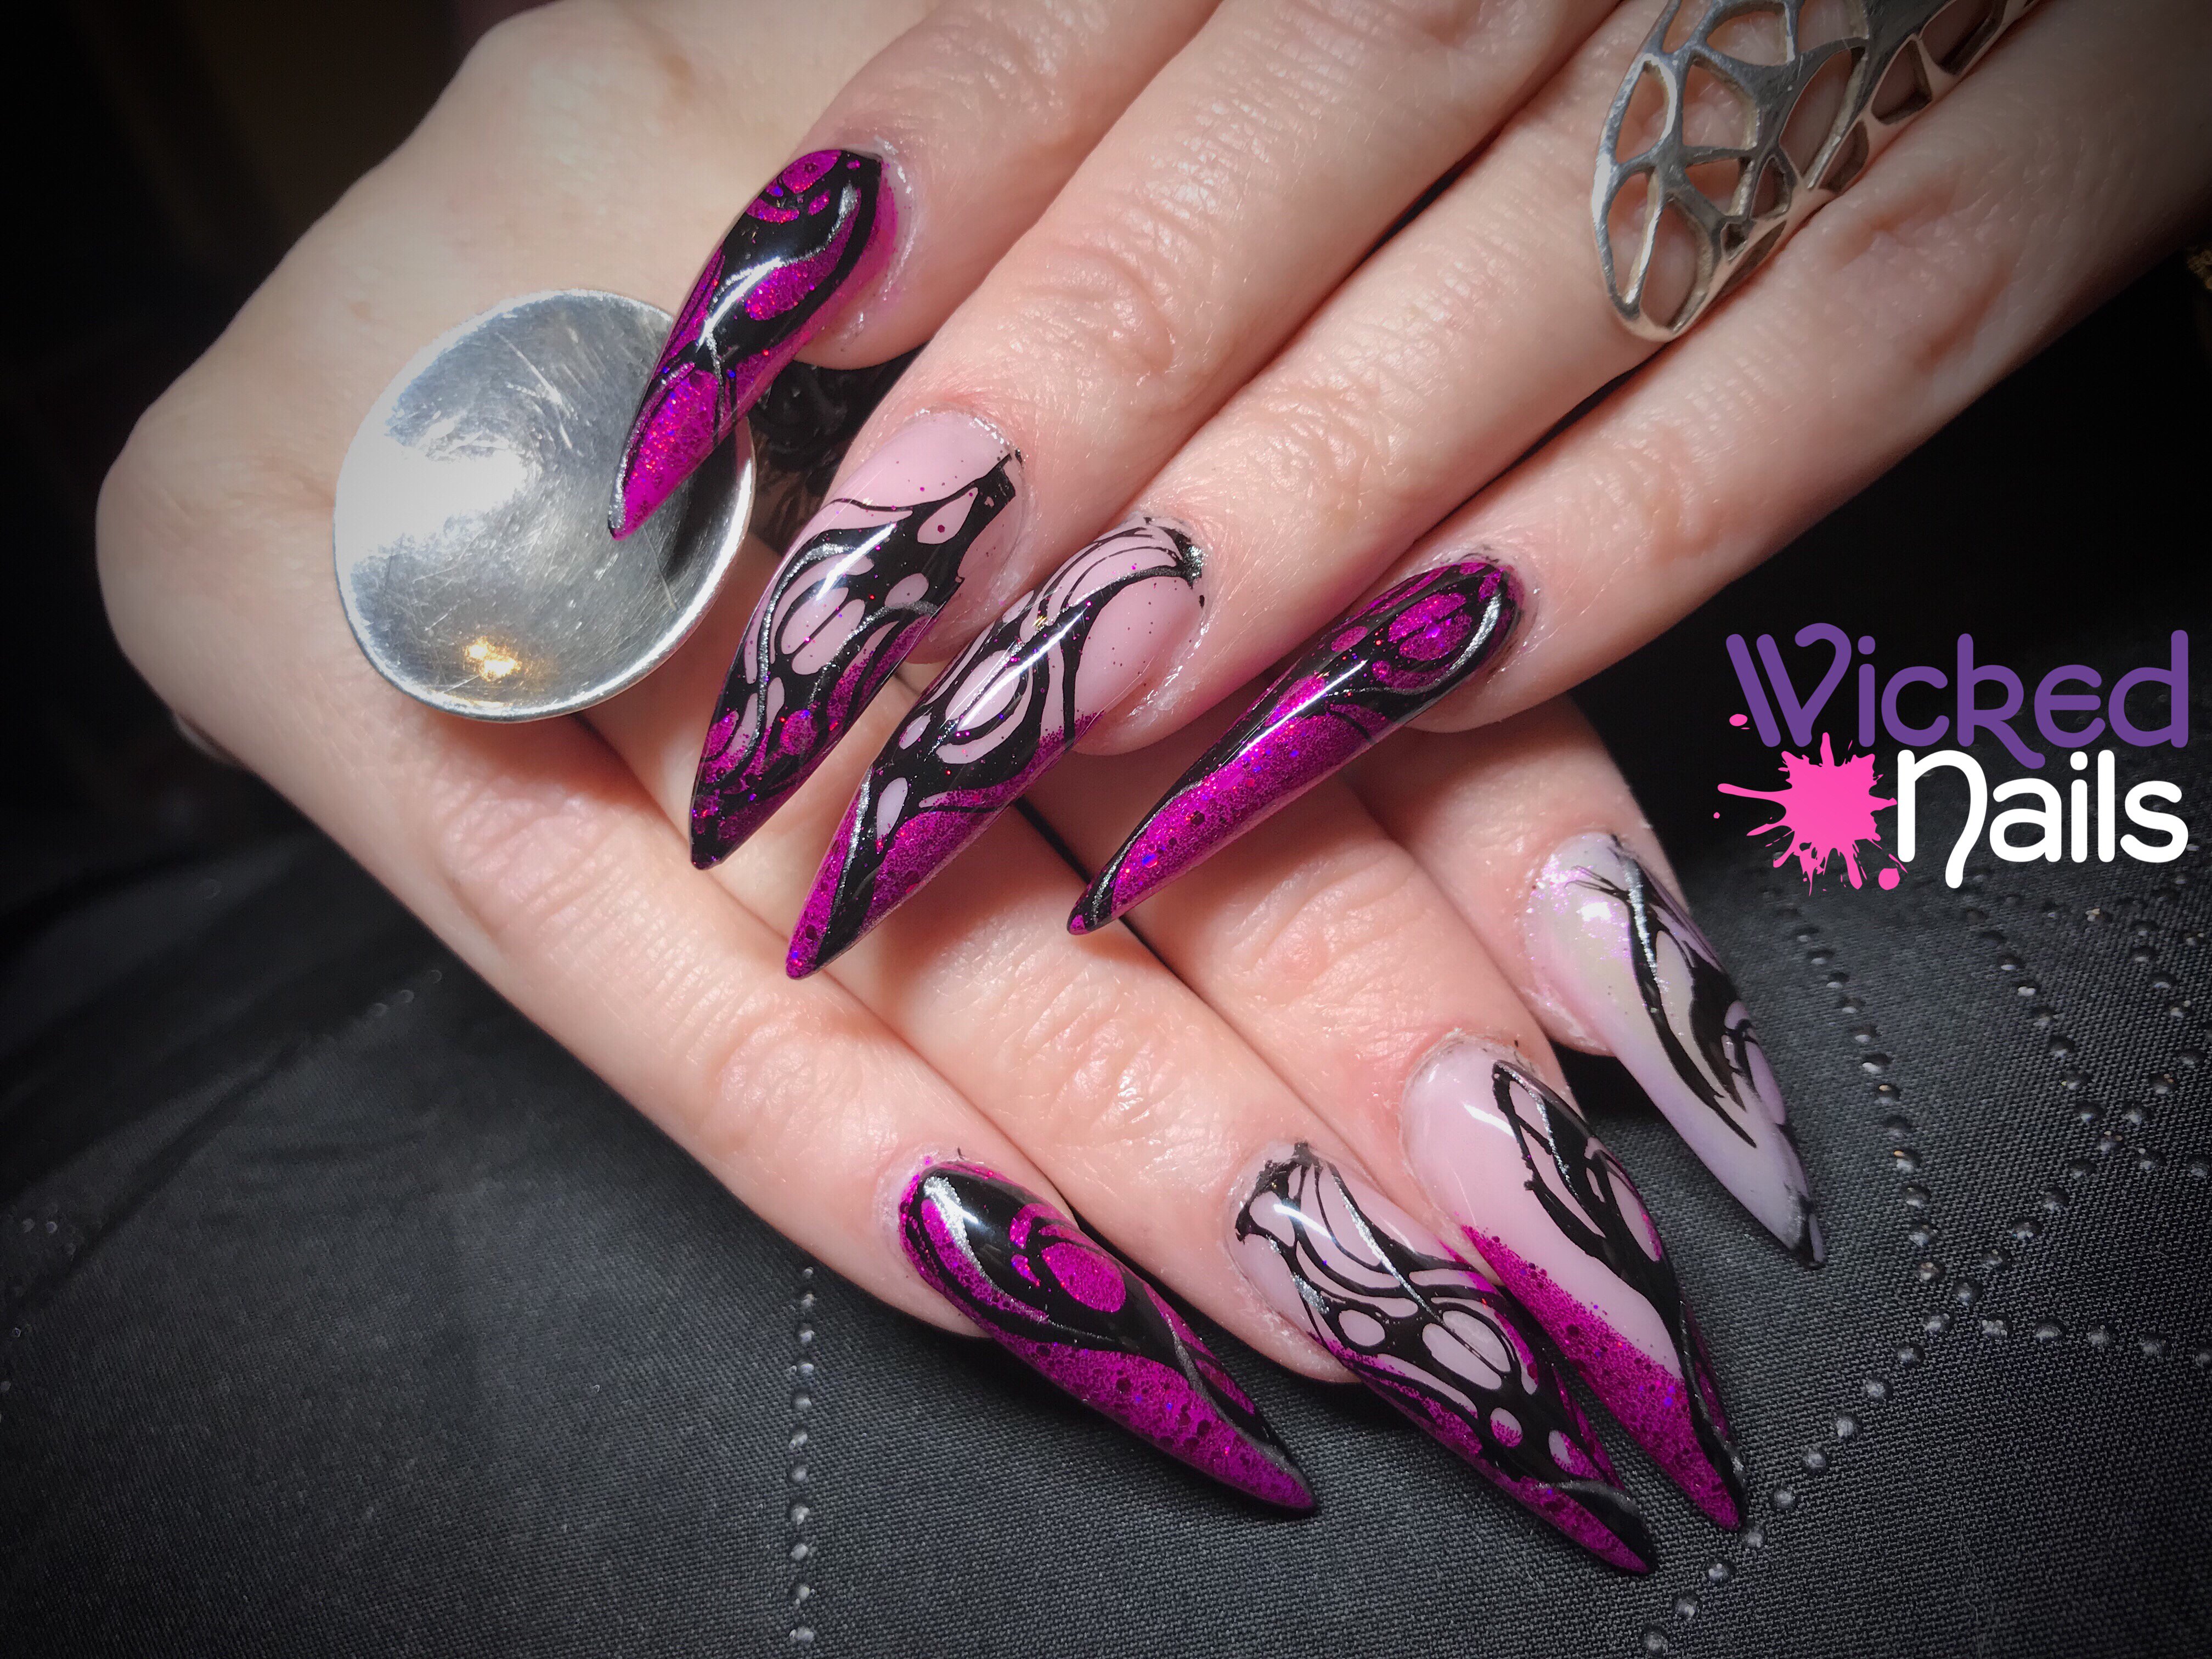 Wicked Nails on Twitter: 